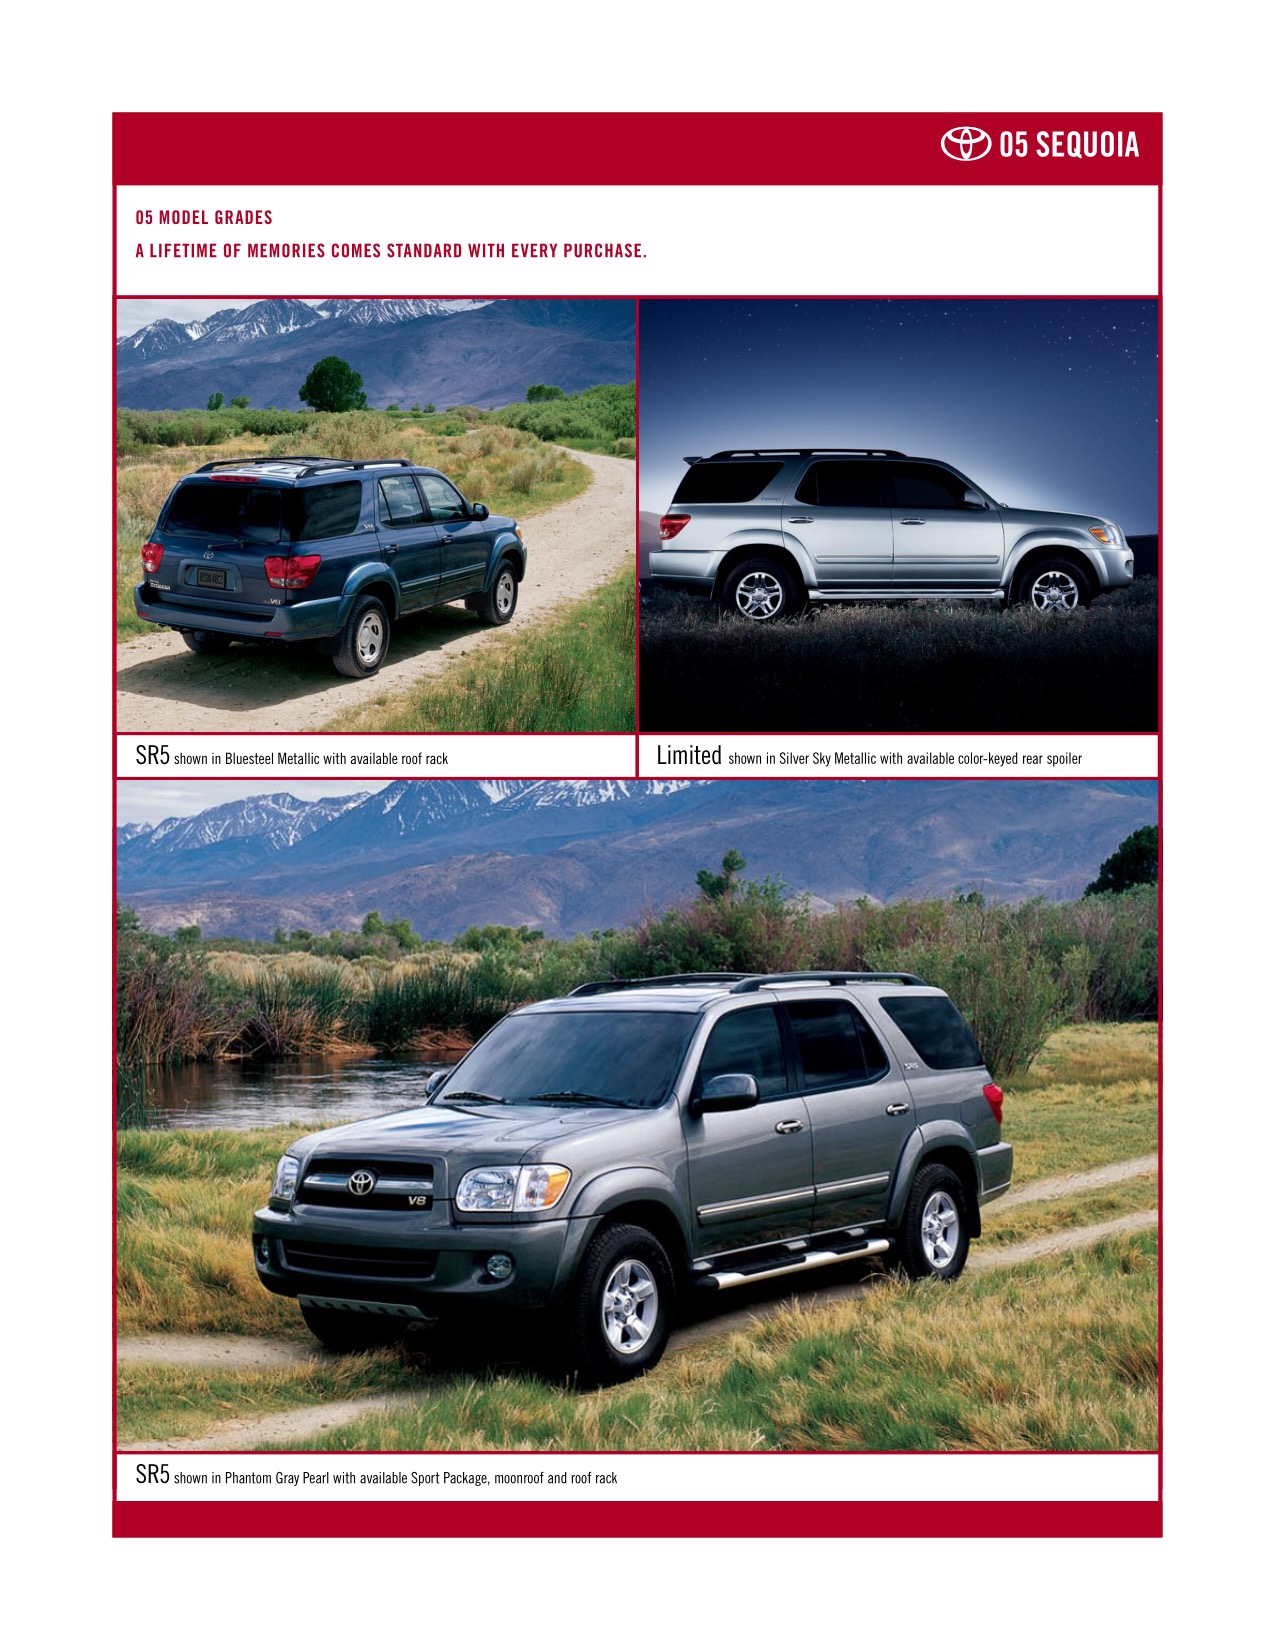 2005 Toyota Sequoia Brochure Page 2